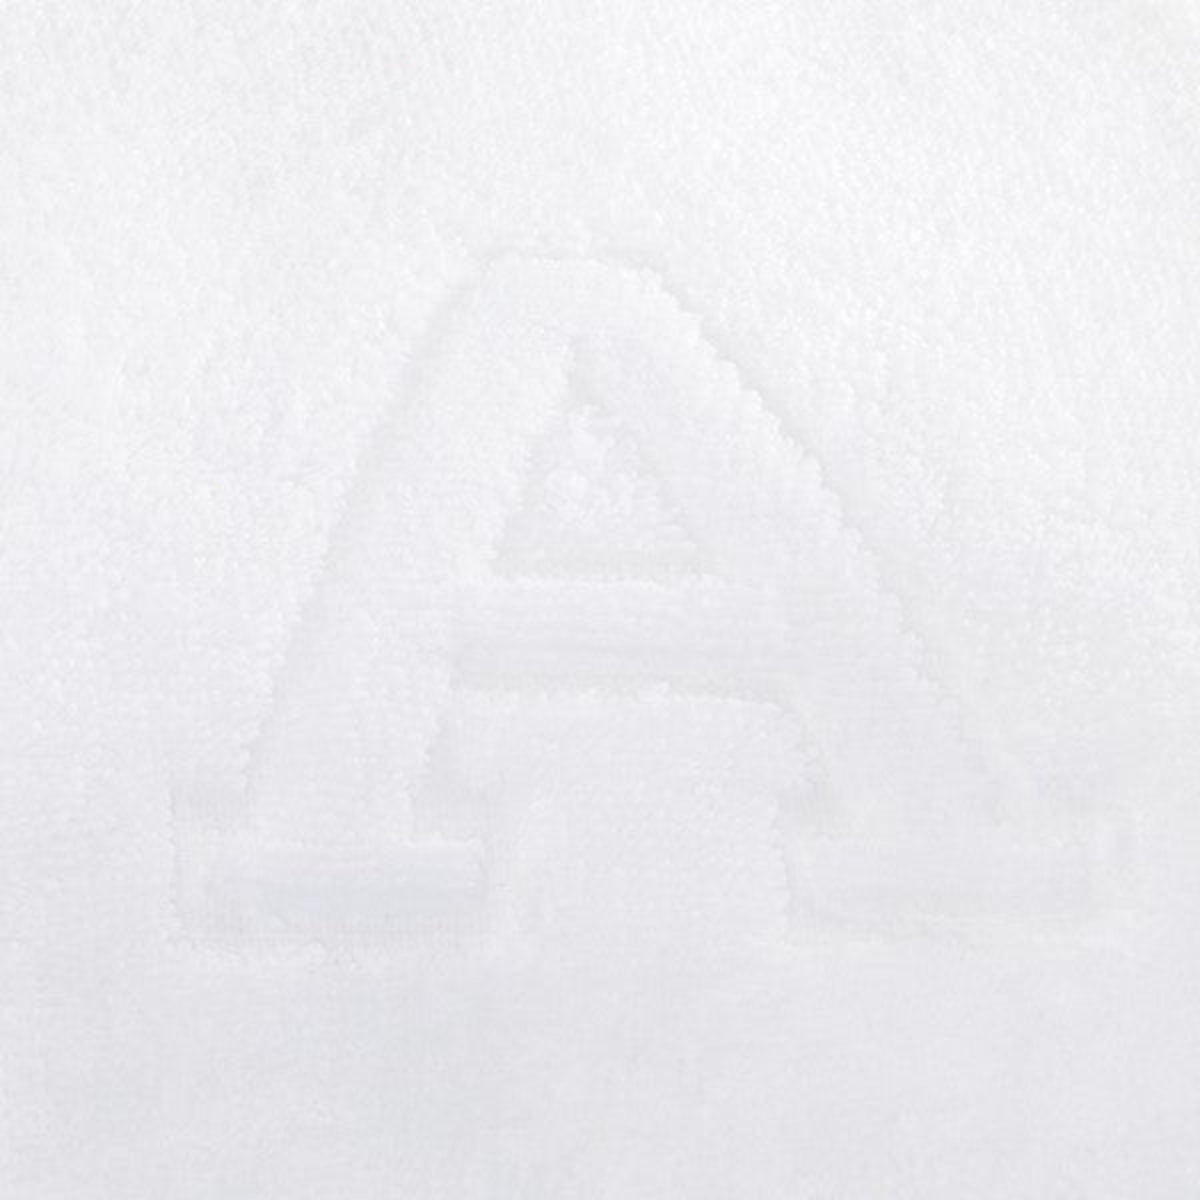 Swatch Sample of Letter A Matouk Auberge Bath Towels